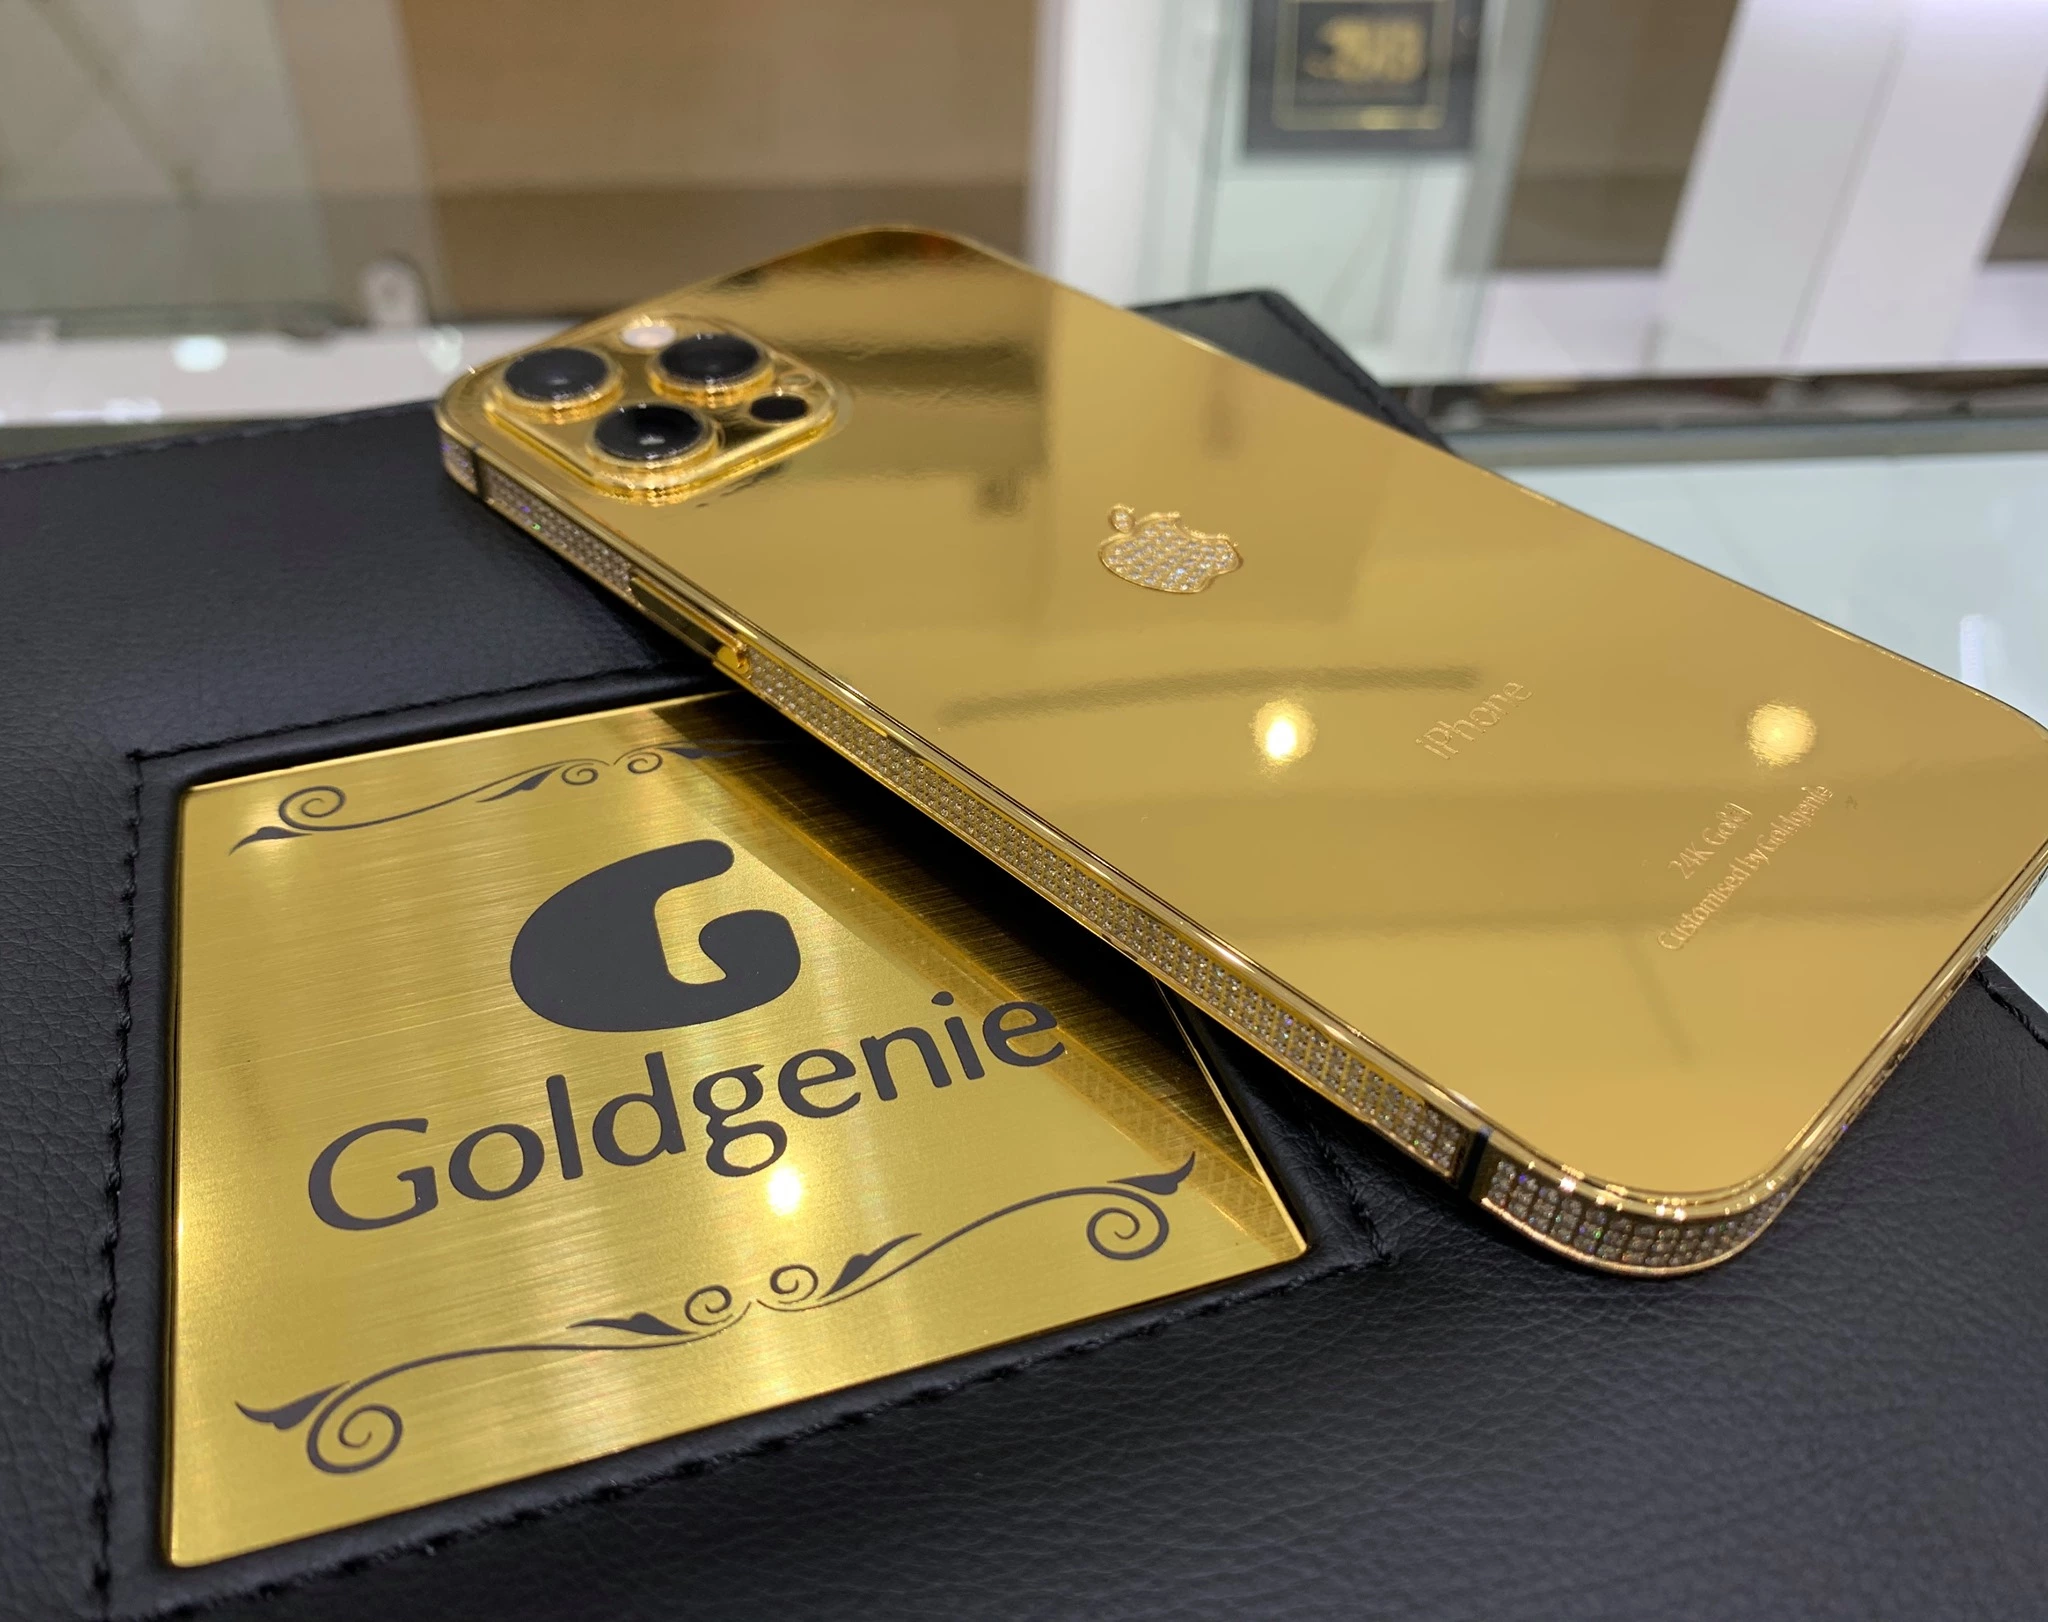 24k Gold iPhone with diamonds